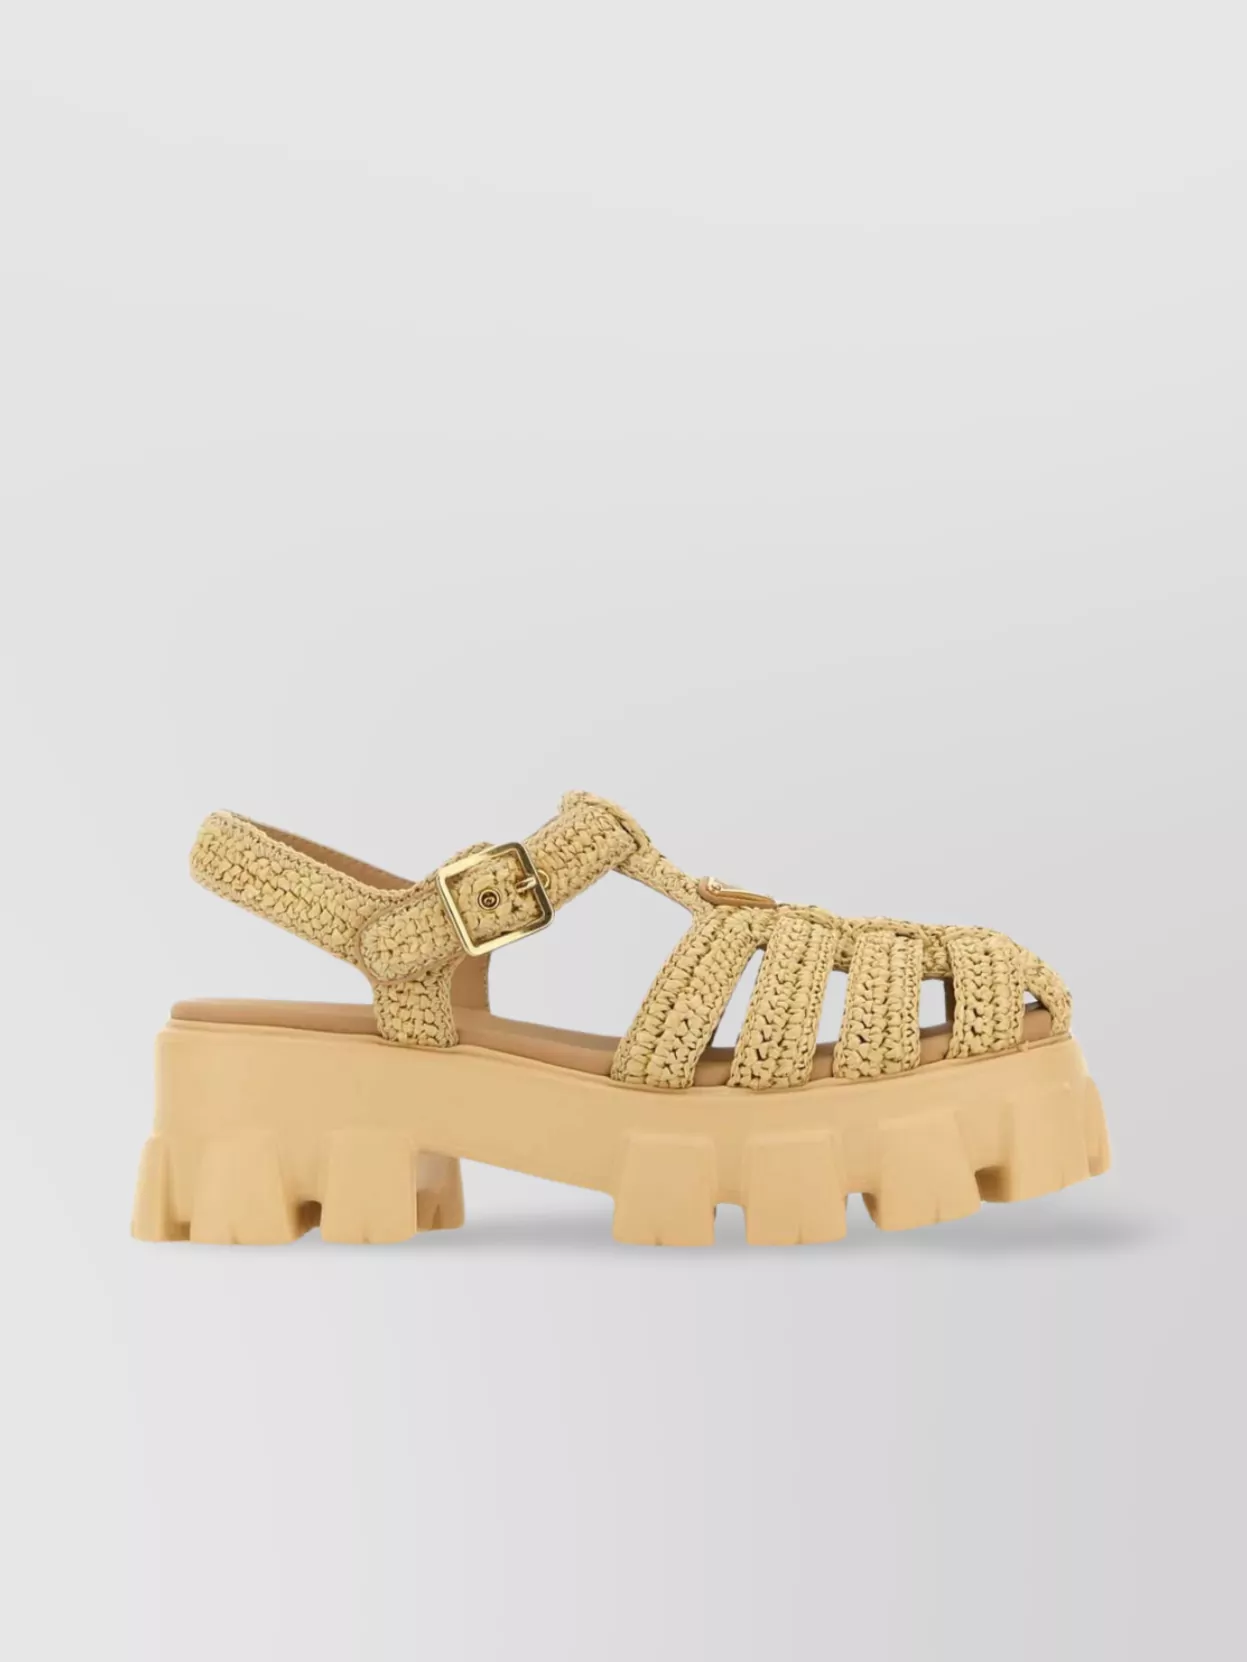 PRADA SOLE STRAPPY SANDALS WITH TEXTURED FINISH